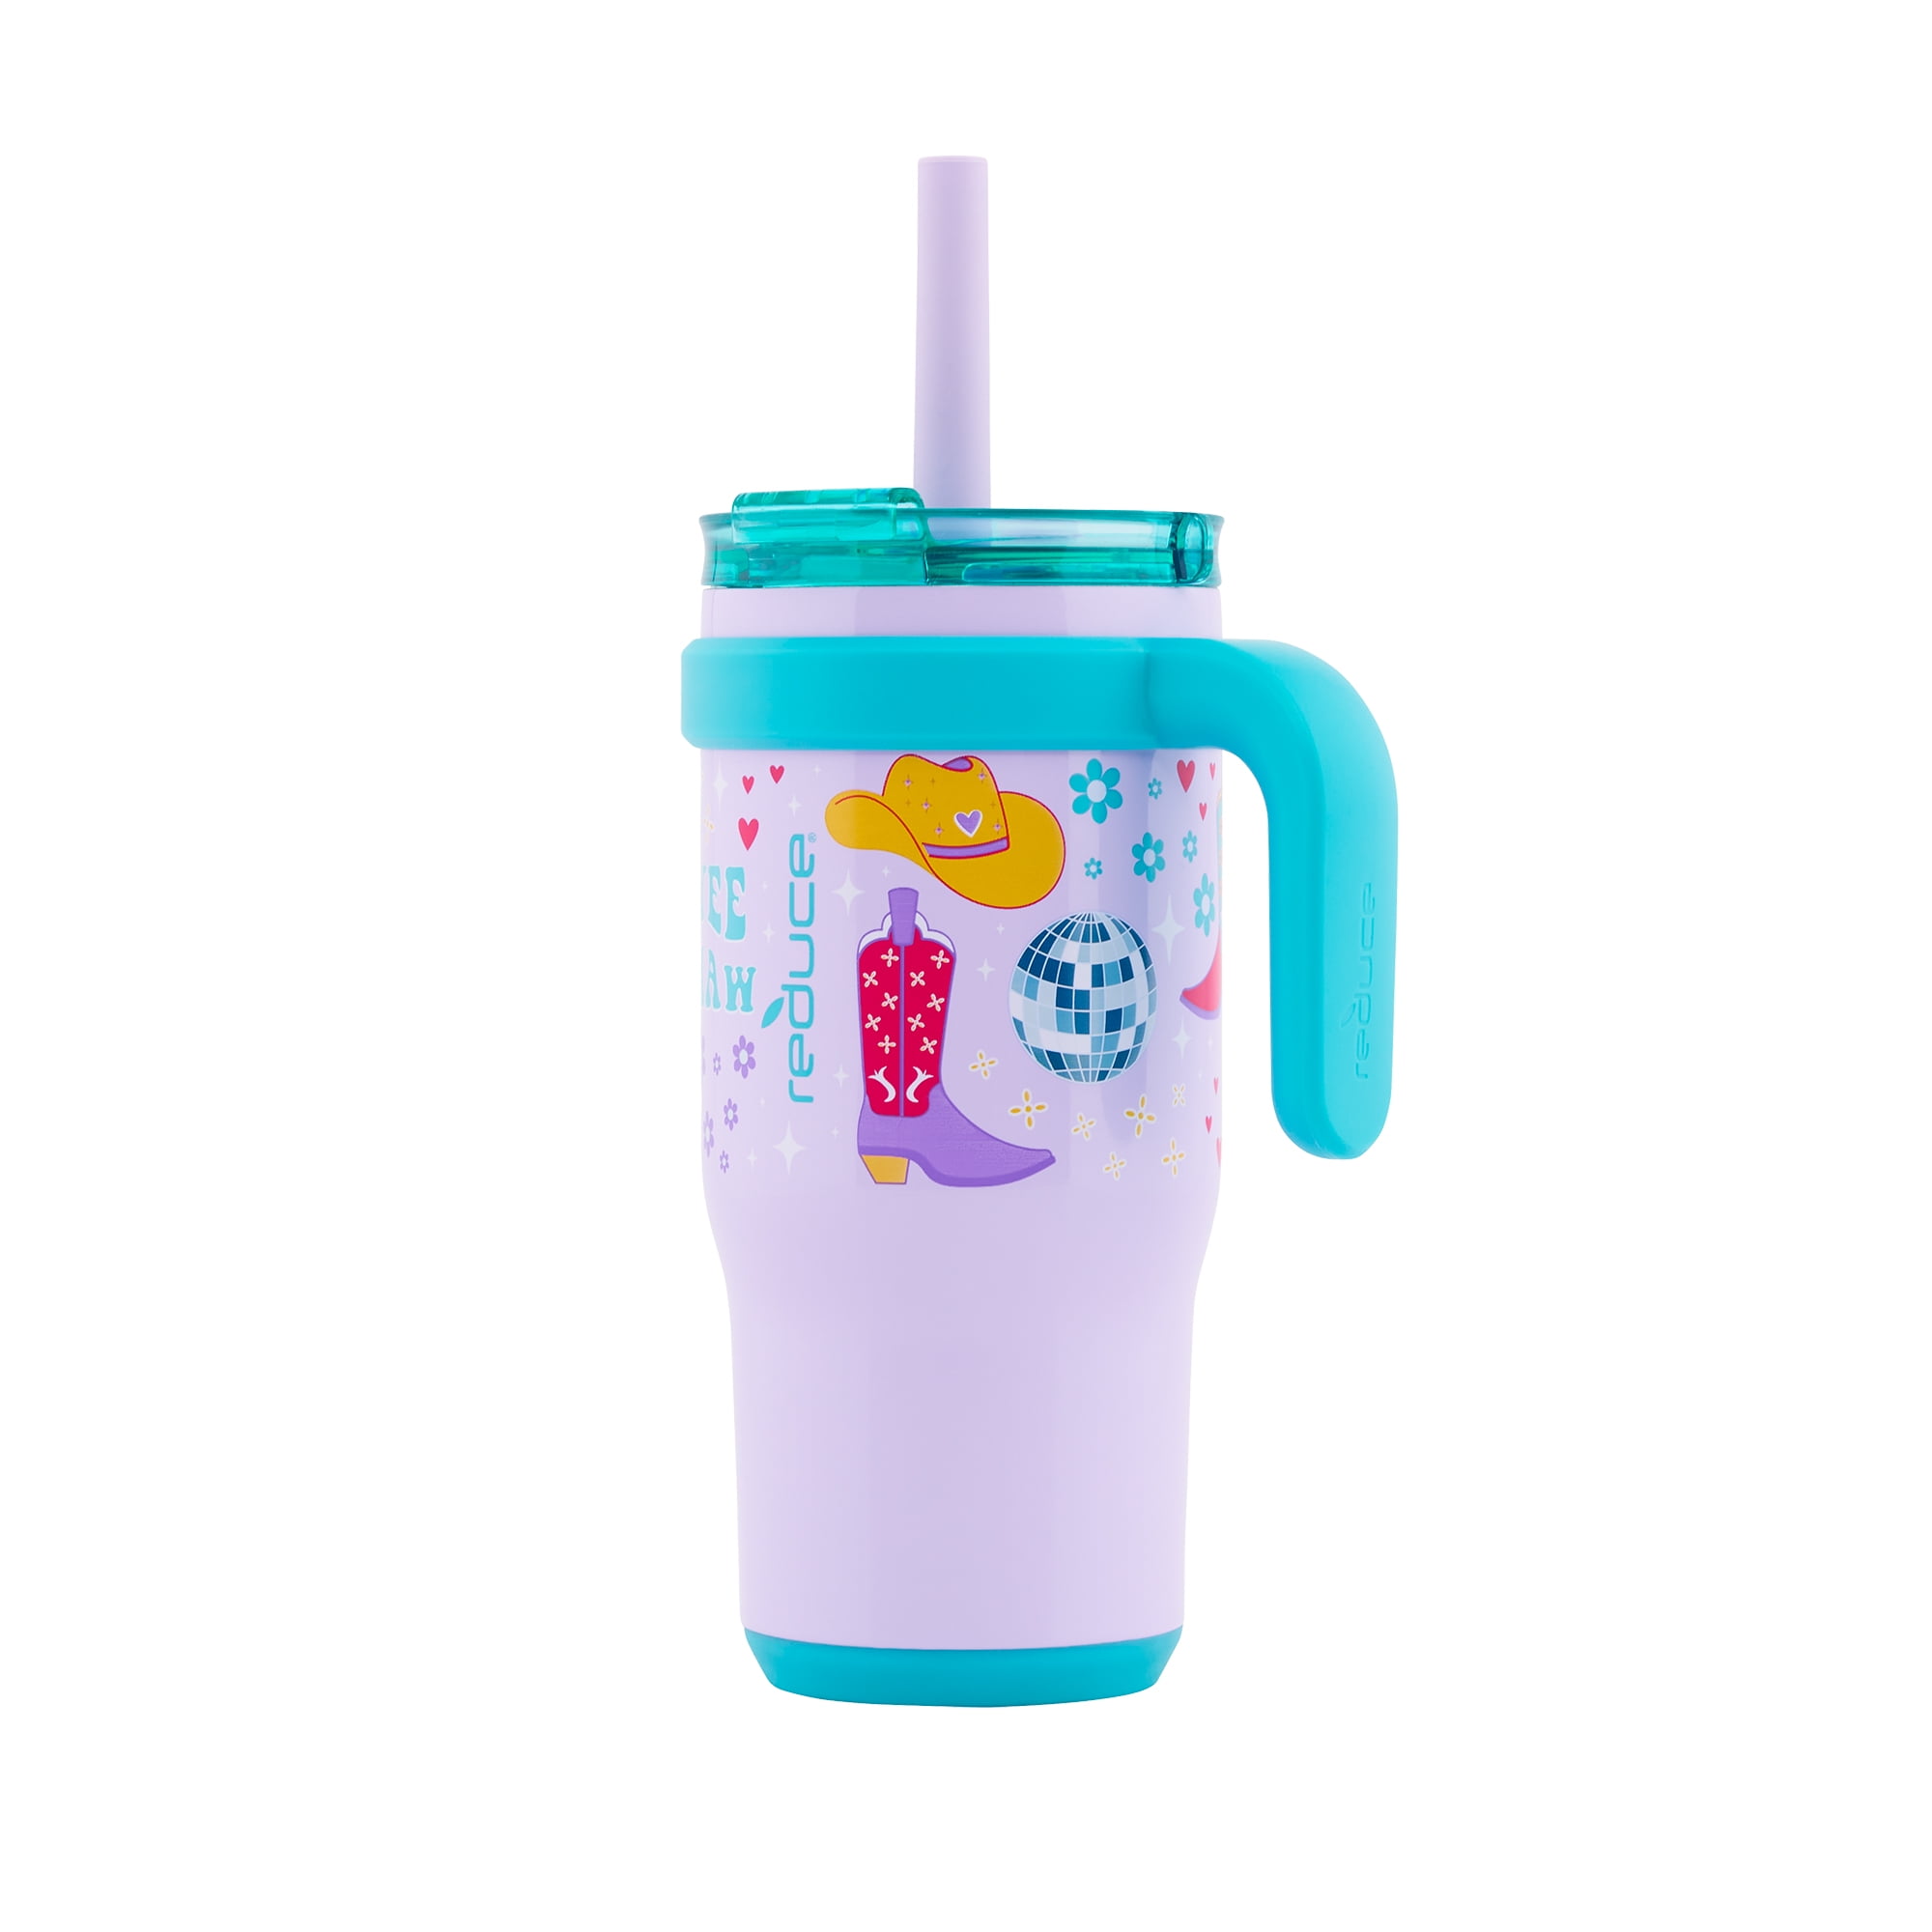 Reusable Cold Cup With Smiley Faces Used for Iced Coffee, Frappes and More  Comes With Reusable Straw NOT DISHWASHER SAFE 